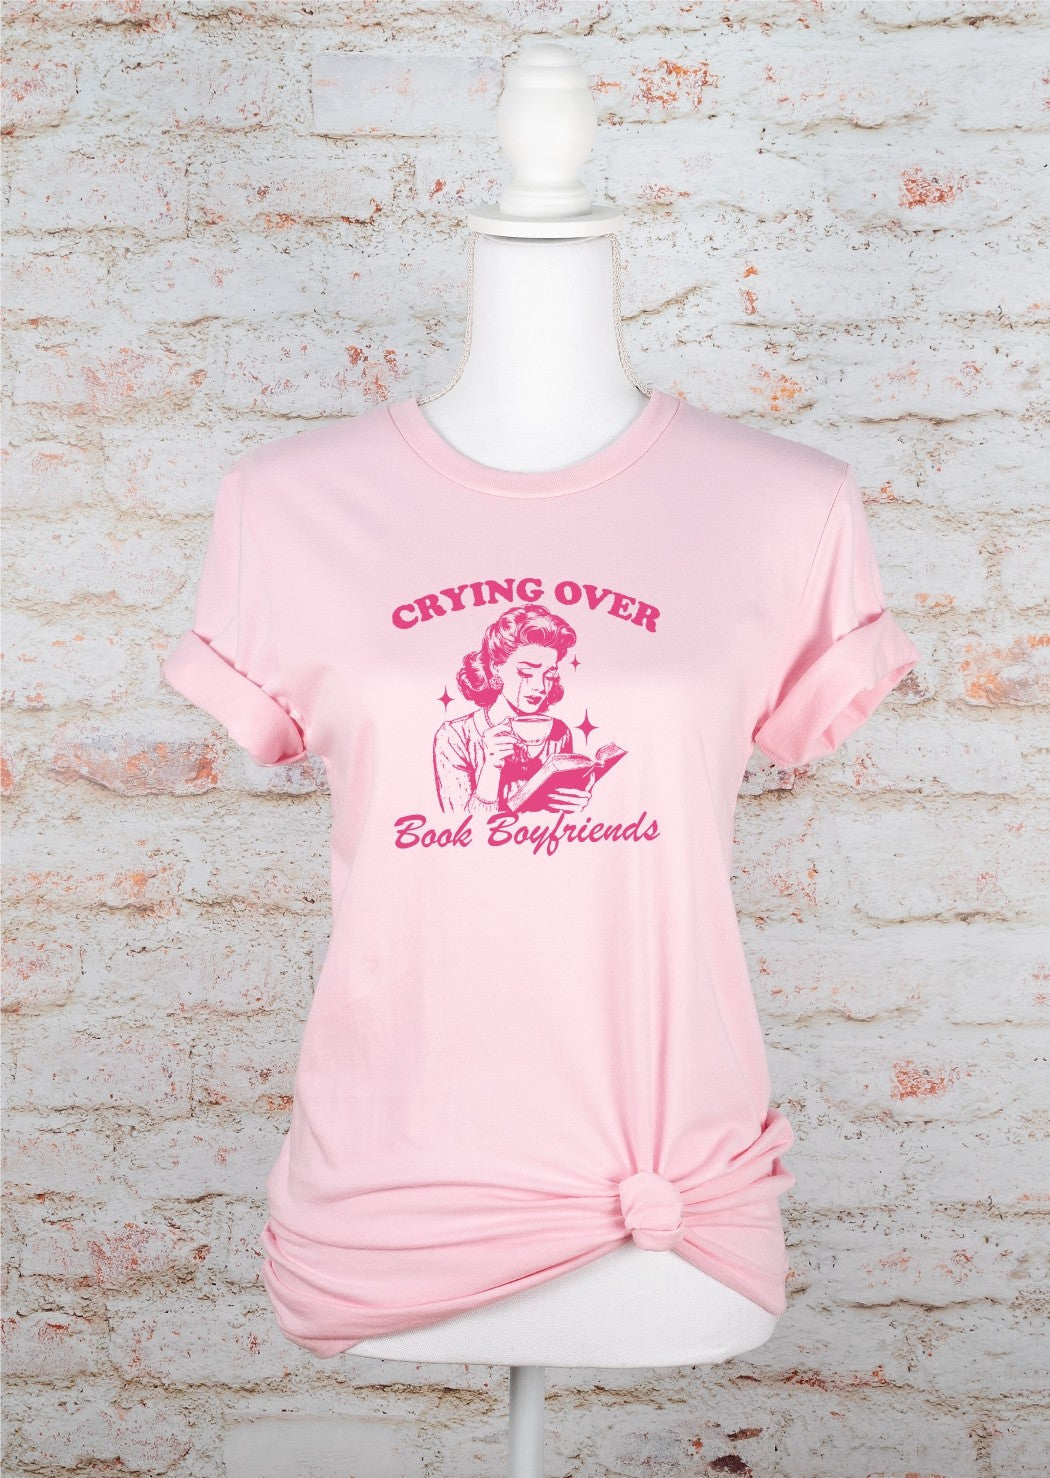 Shop Crying Over Book Boyfriends-Graphic Tee at Ruby Joy Boutique, a Women's Clothing Store in Pickerington, Ohio